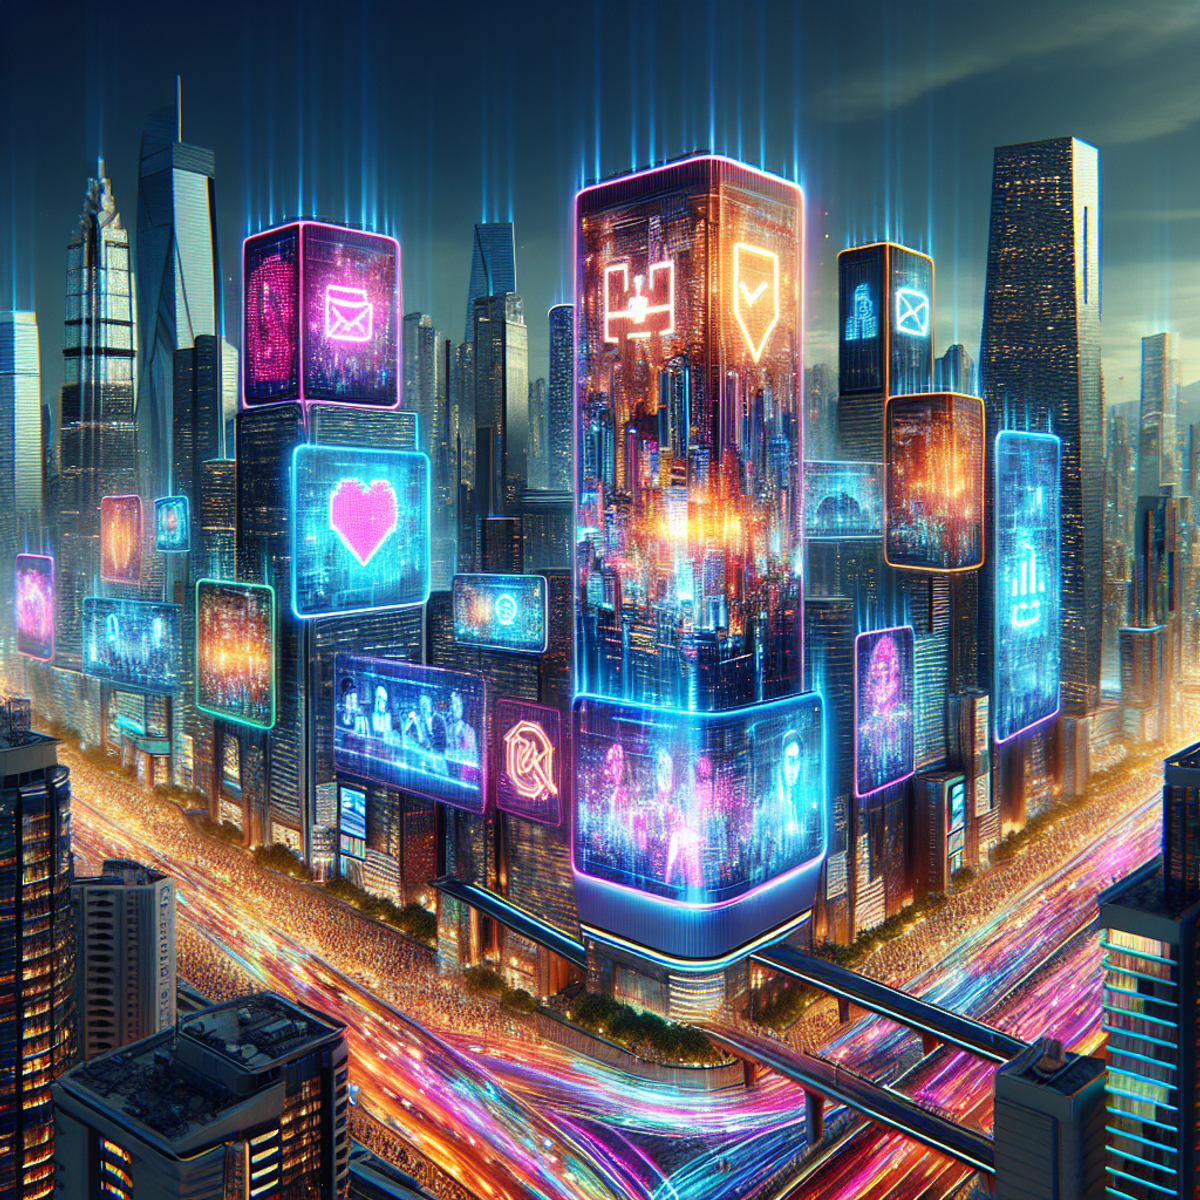 A futuristic cityscape with towering skyscrapers covered in vibrant, glowing digital billboards displaying symbols of digital marketing, bustling with